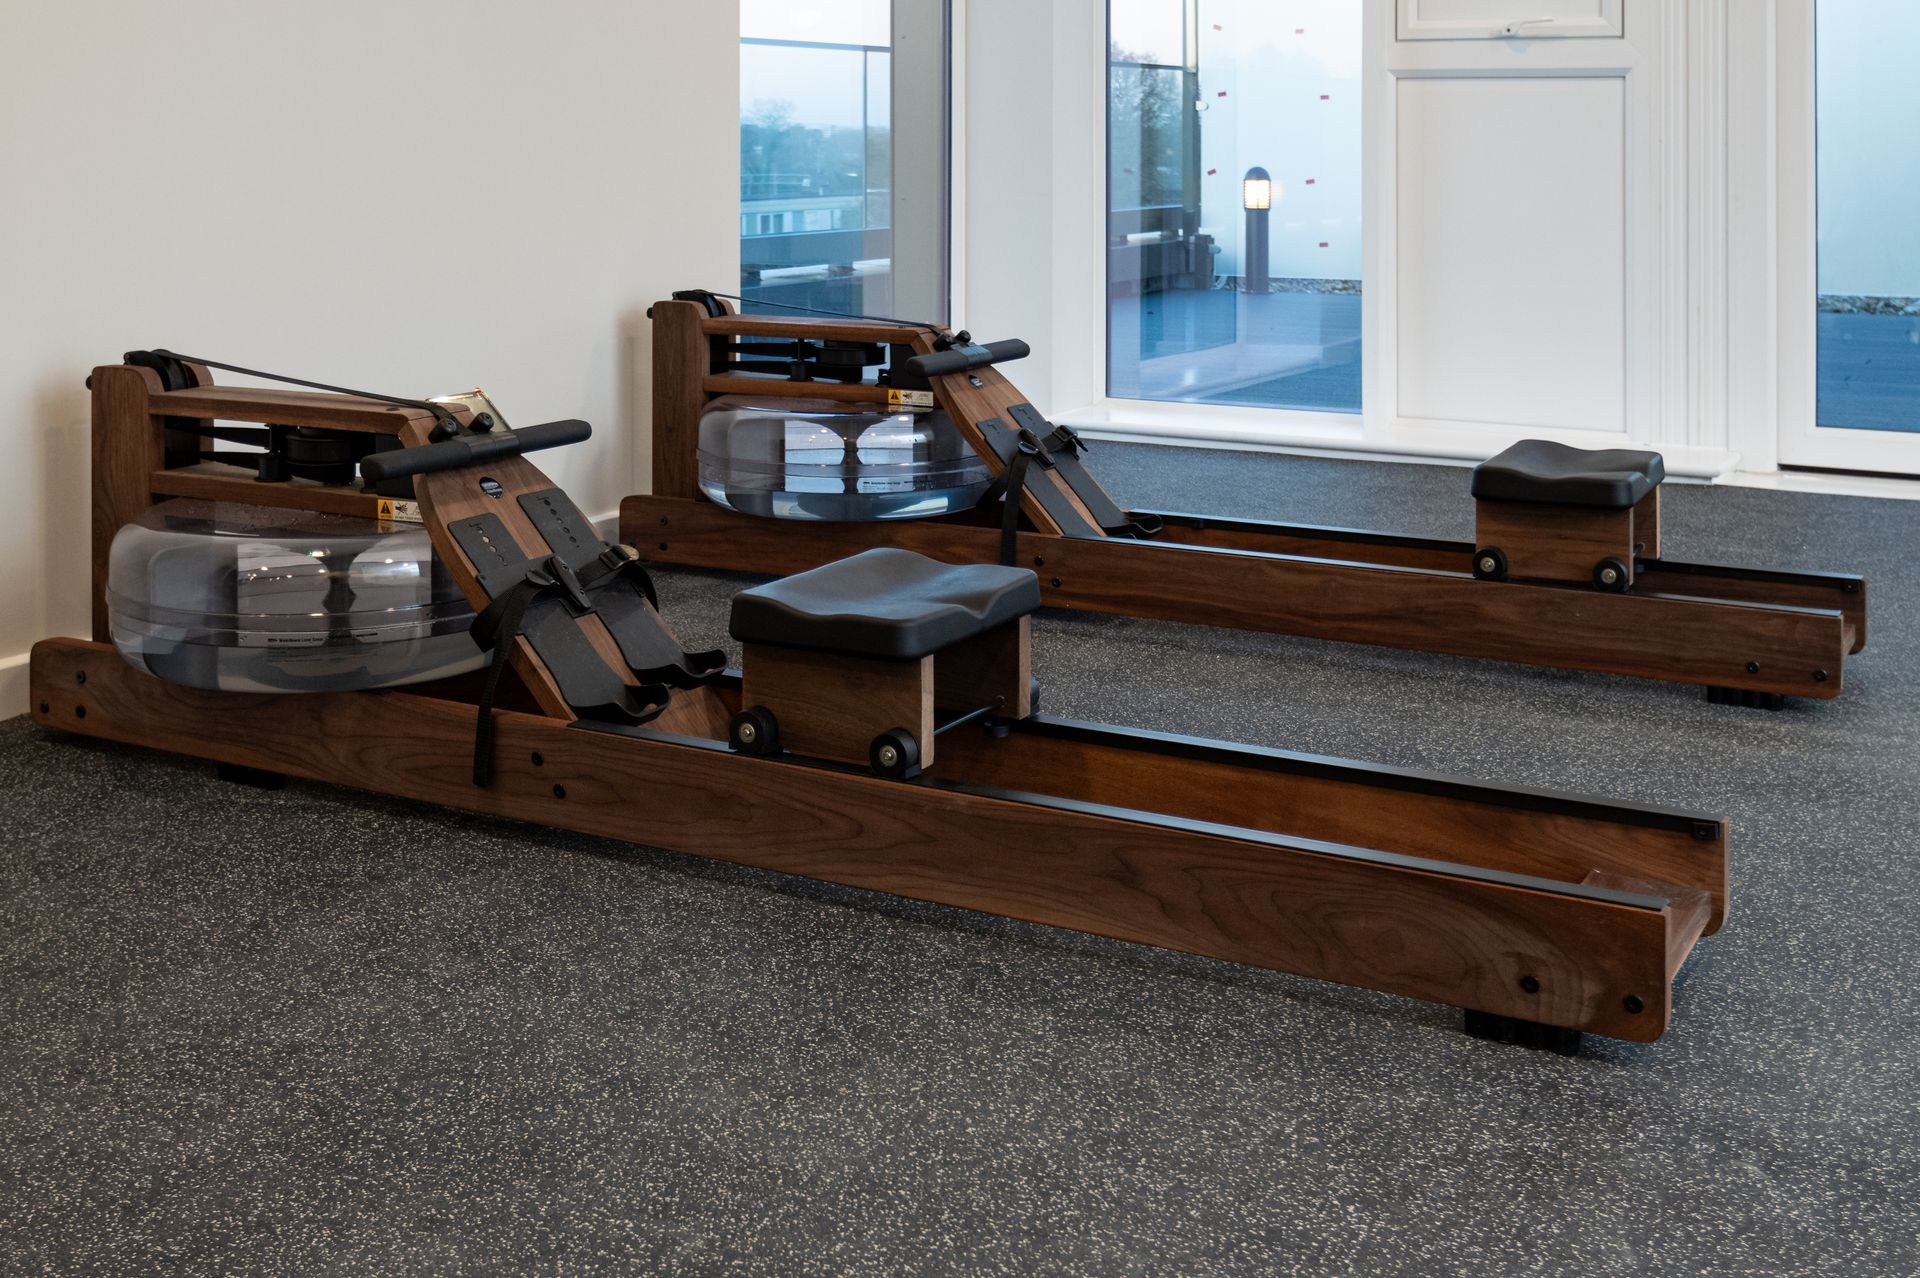 Two wooden rowing machines are sitting on a rubber floor in a gym at Walton Court.